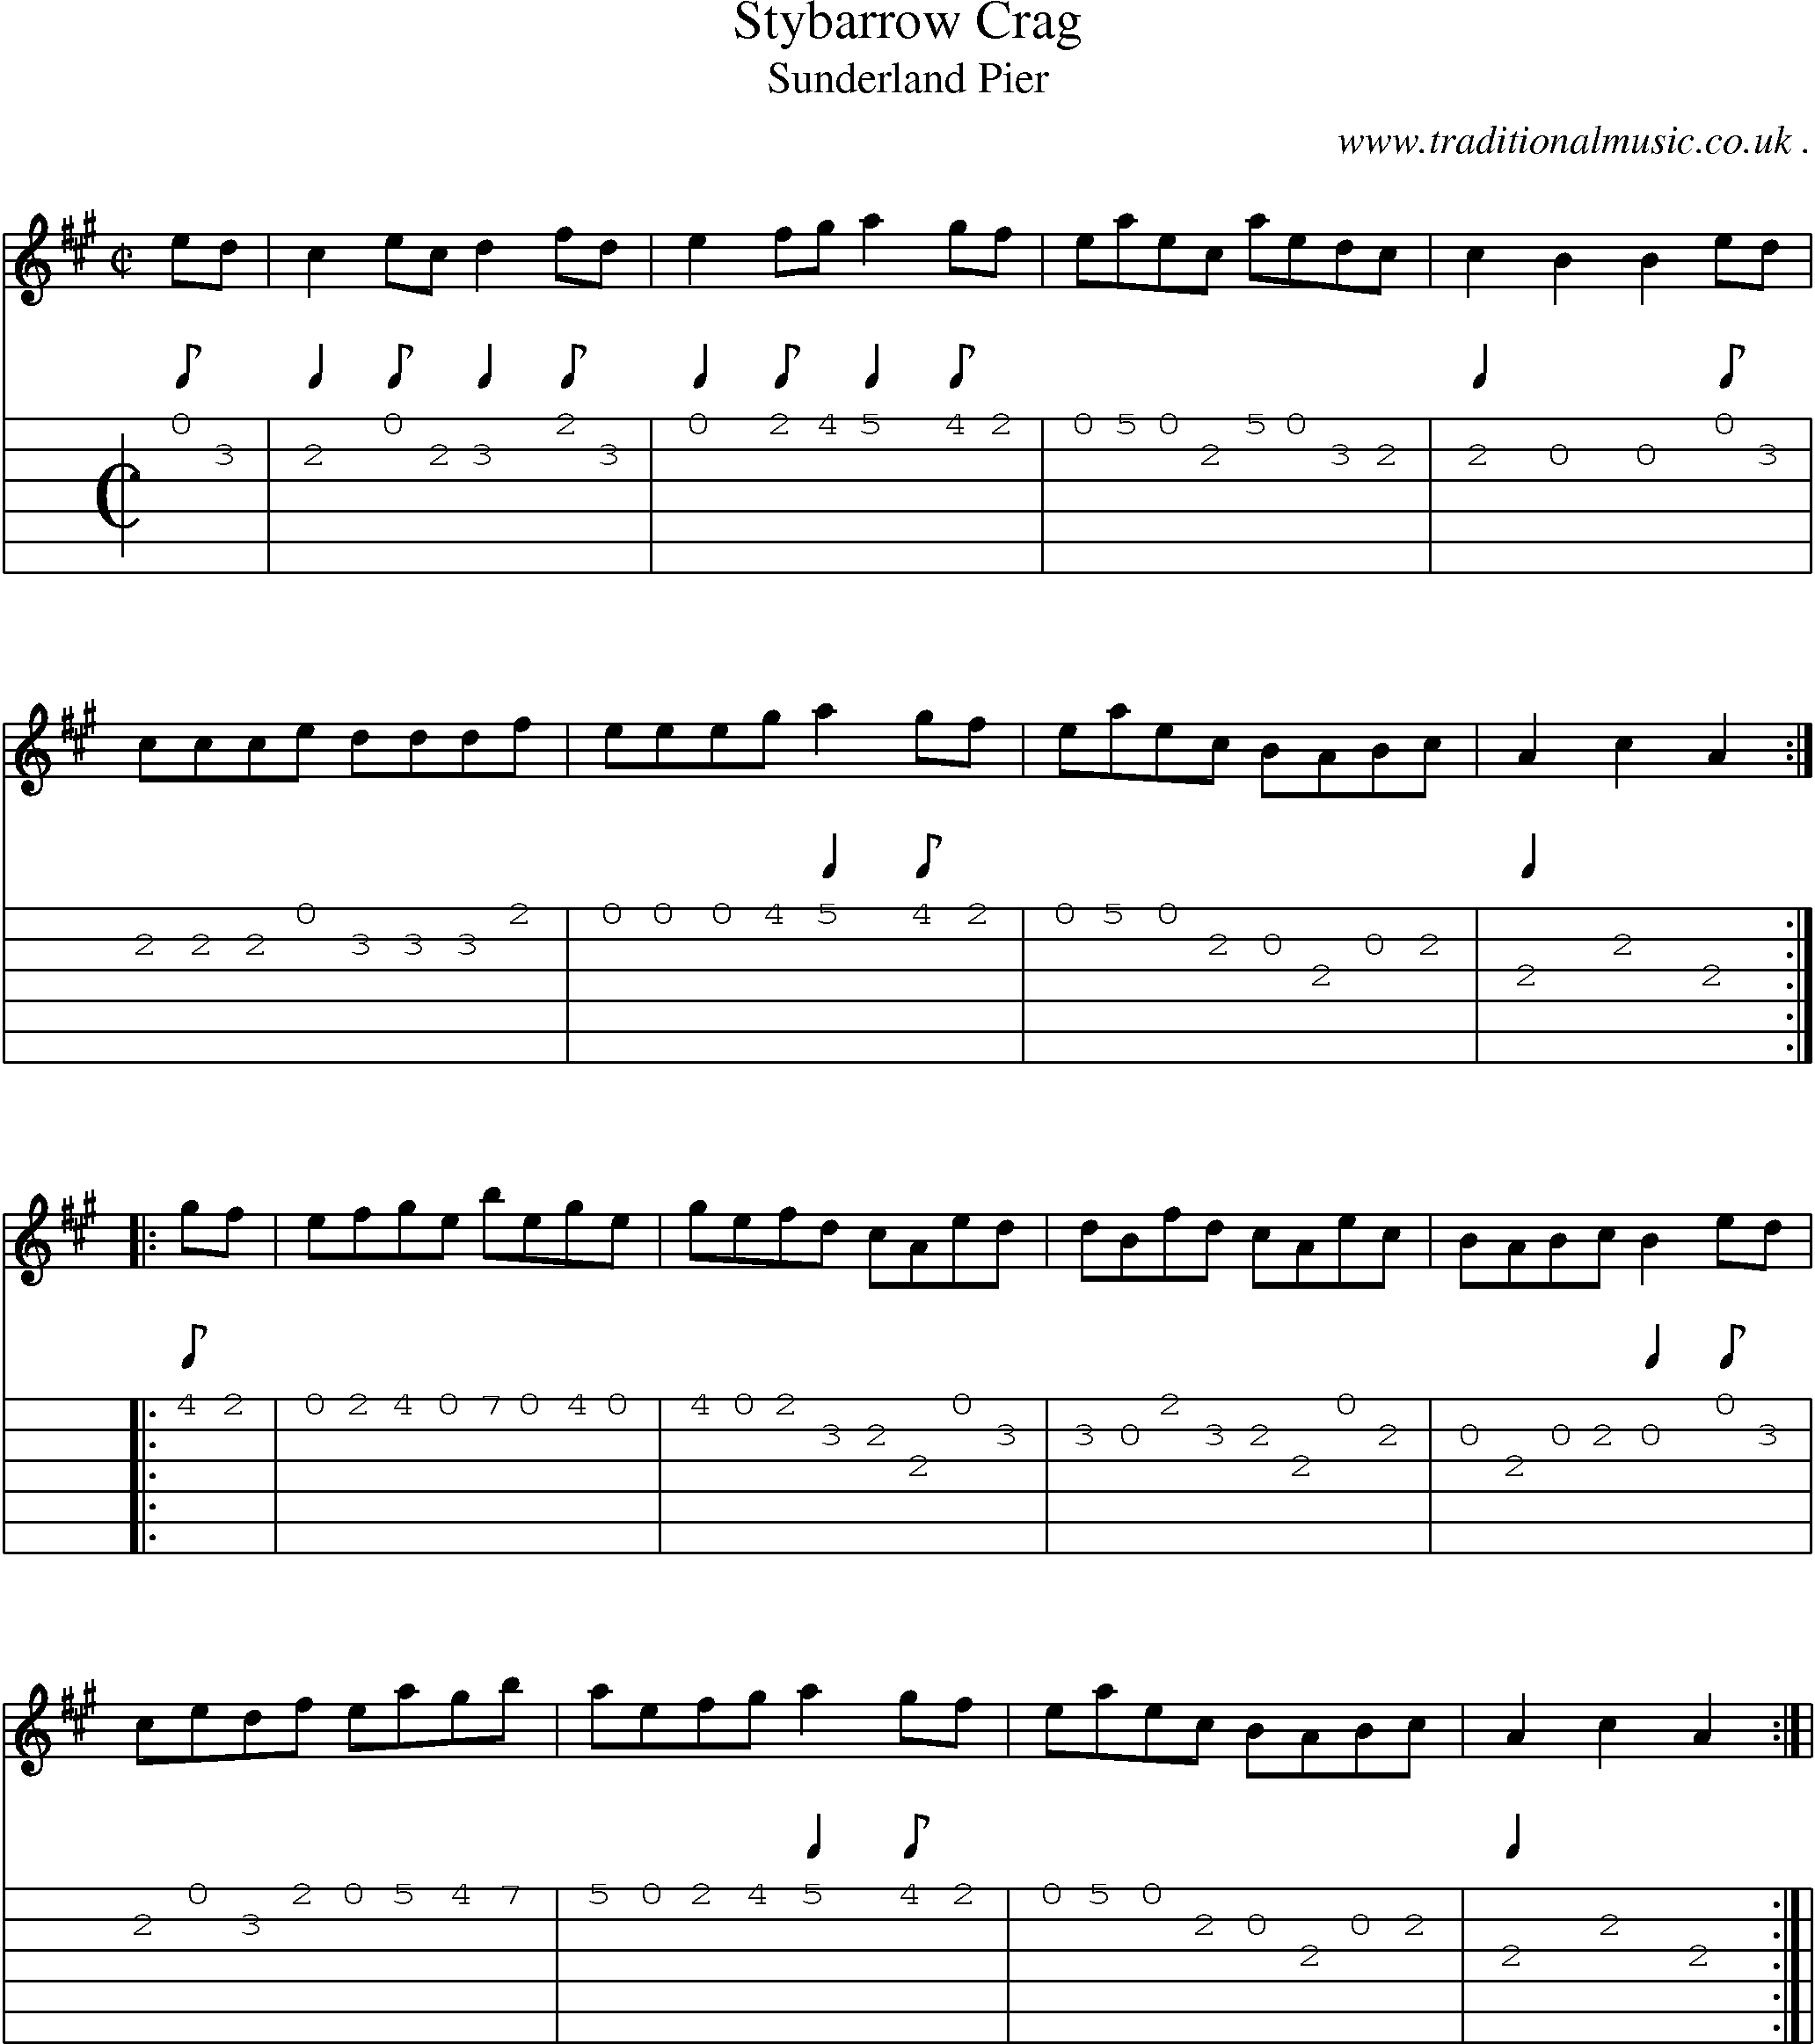 Sheet-Music and Guitar Tabs for Stybarrow Crag